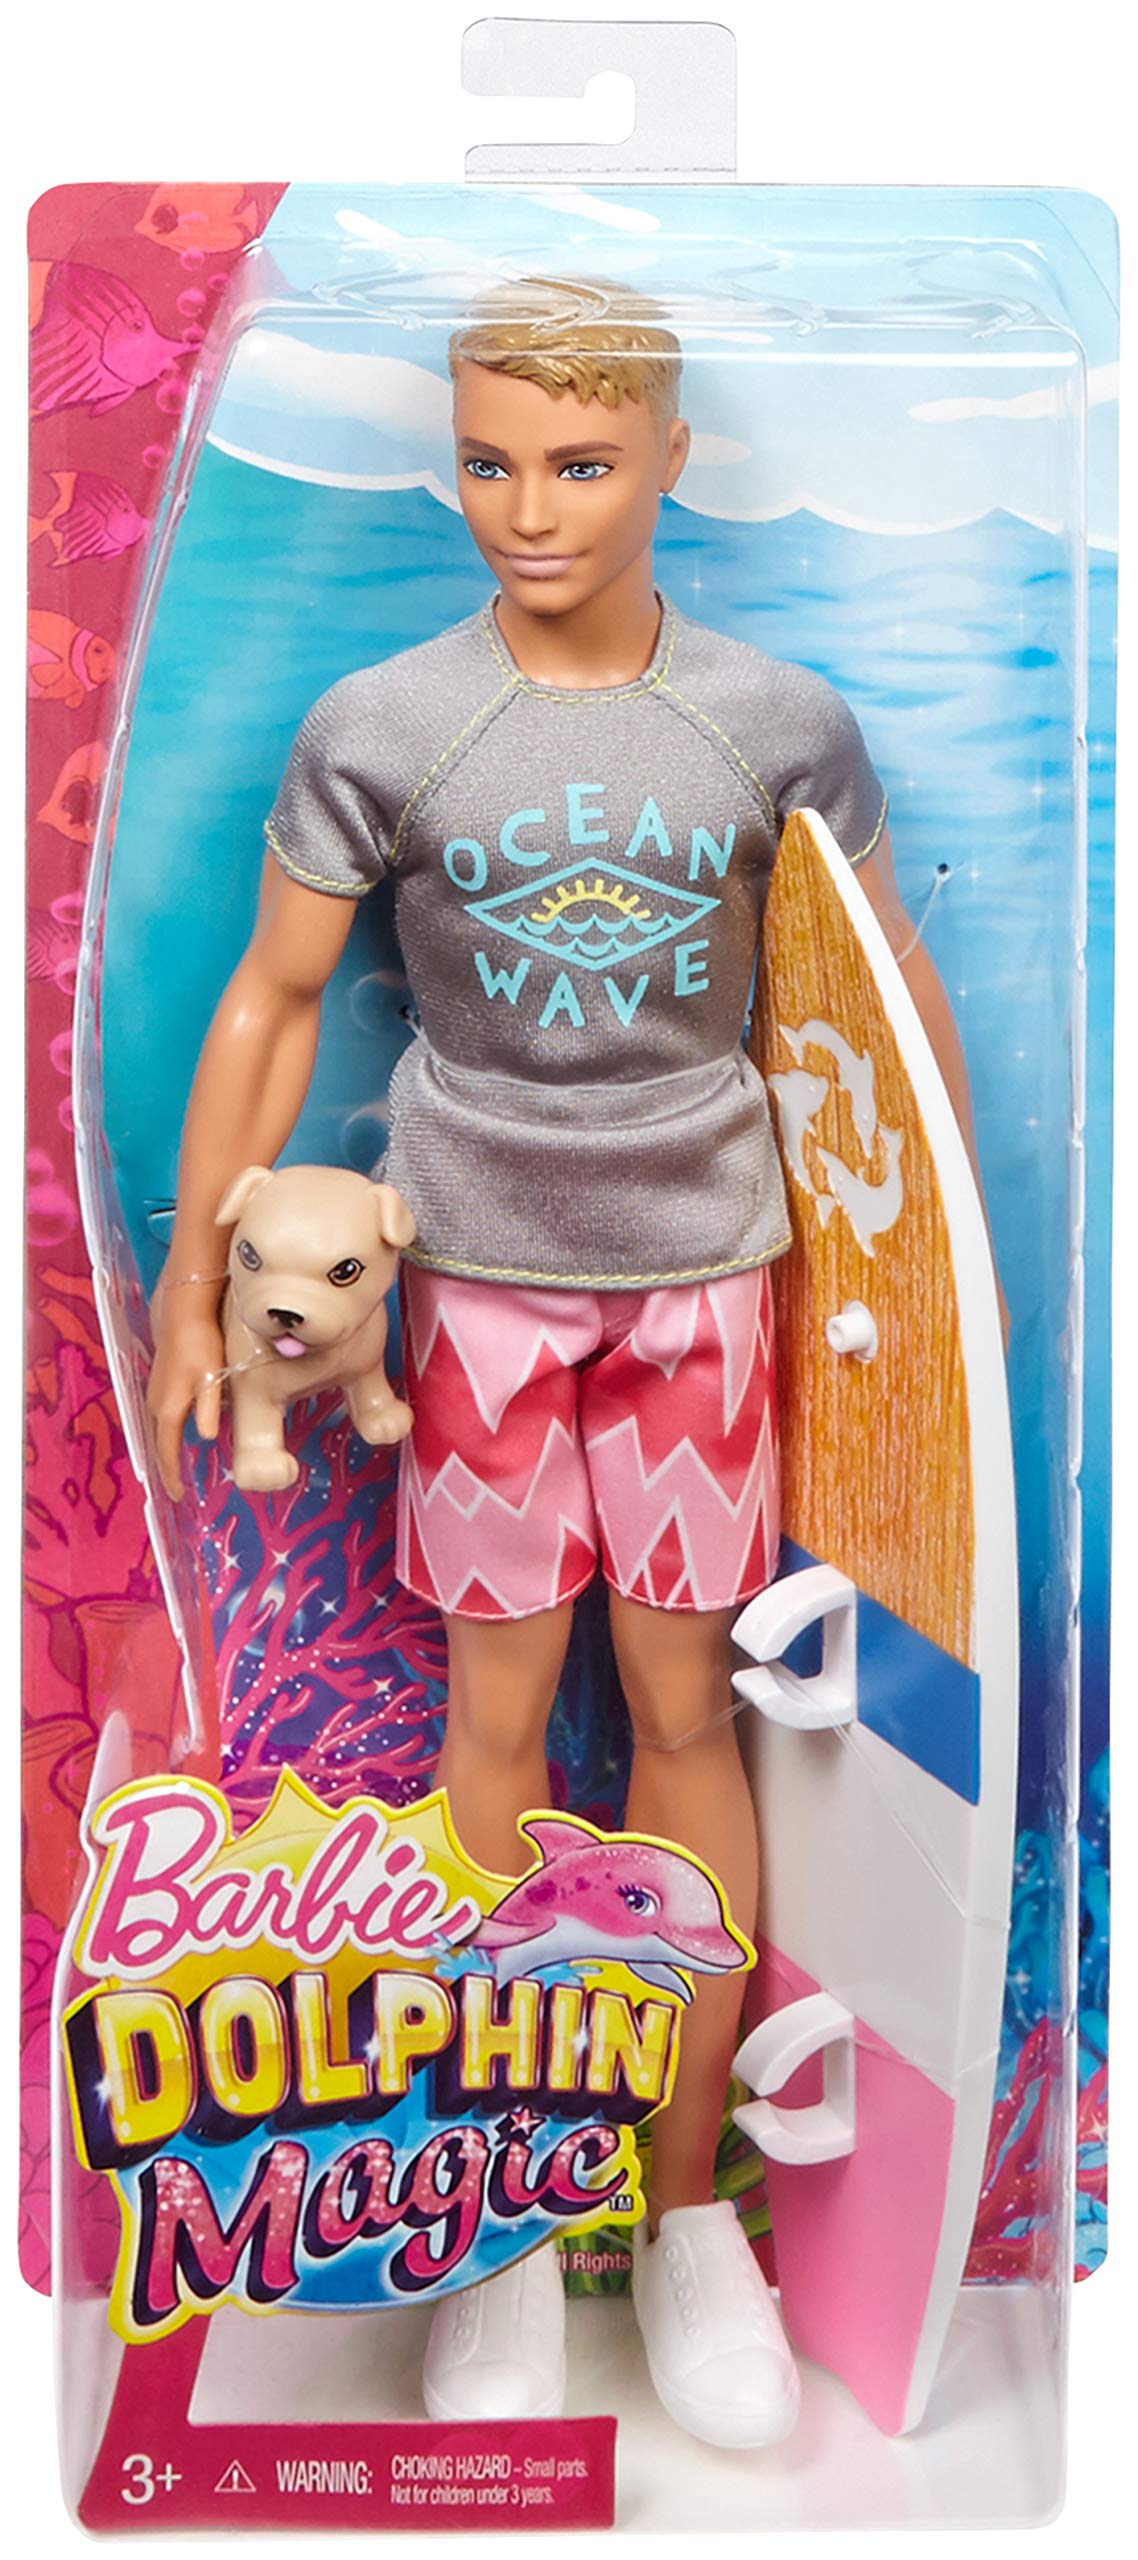 Ken Doll with Puppy and Surfboard